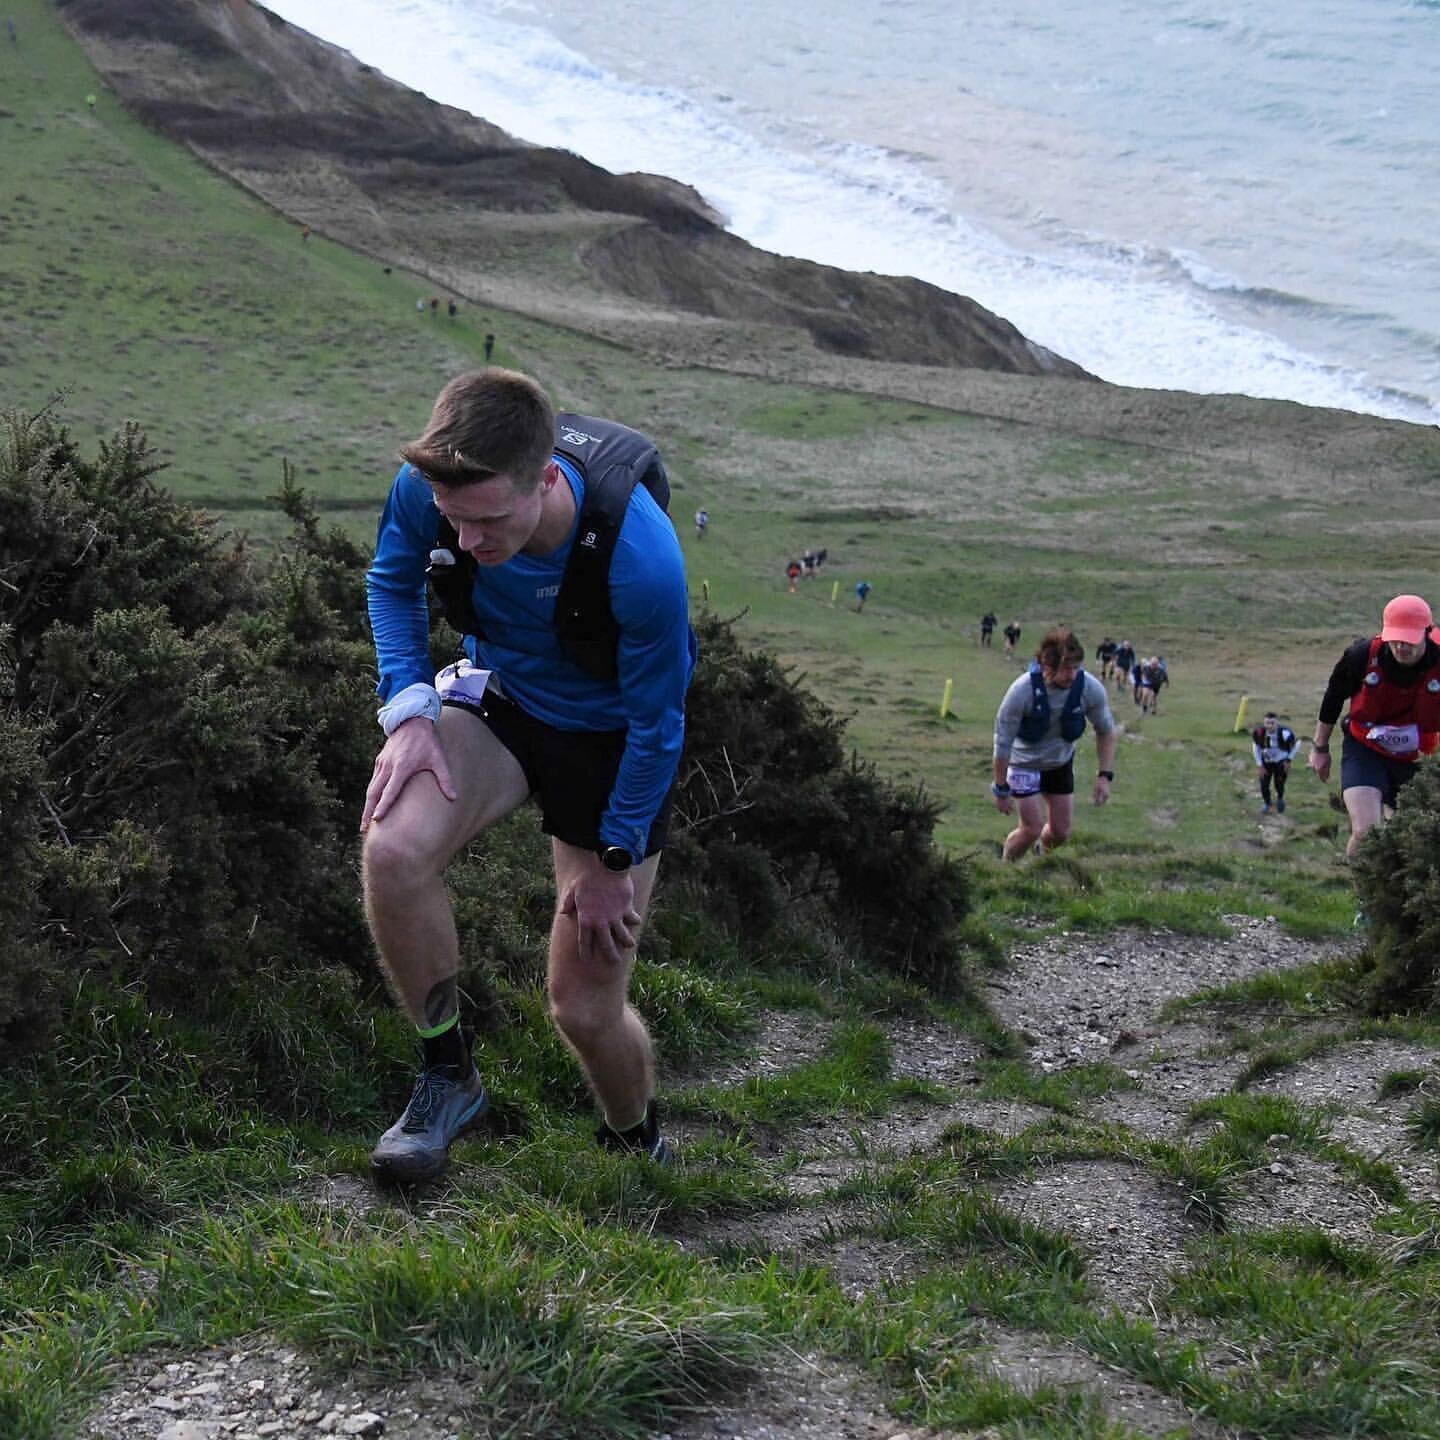 🏆 1st place and new course record! 

Congrats to @teamhp3 athlete @lewisryan at your final race of 2022: @endurancelife Dorset Ultra🥇

&mdash;&mdash;&mdash;&mdash;&mdash;&mdash;&mdash;&mdash;-
I love this route. Gentle rolling coastline coupled wit